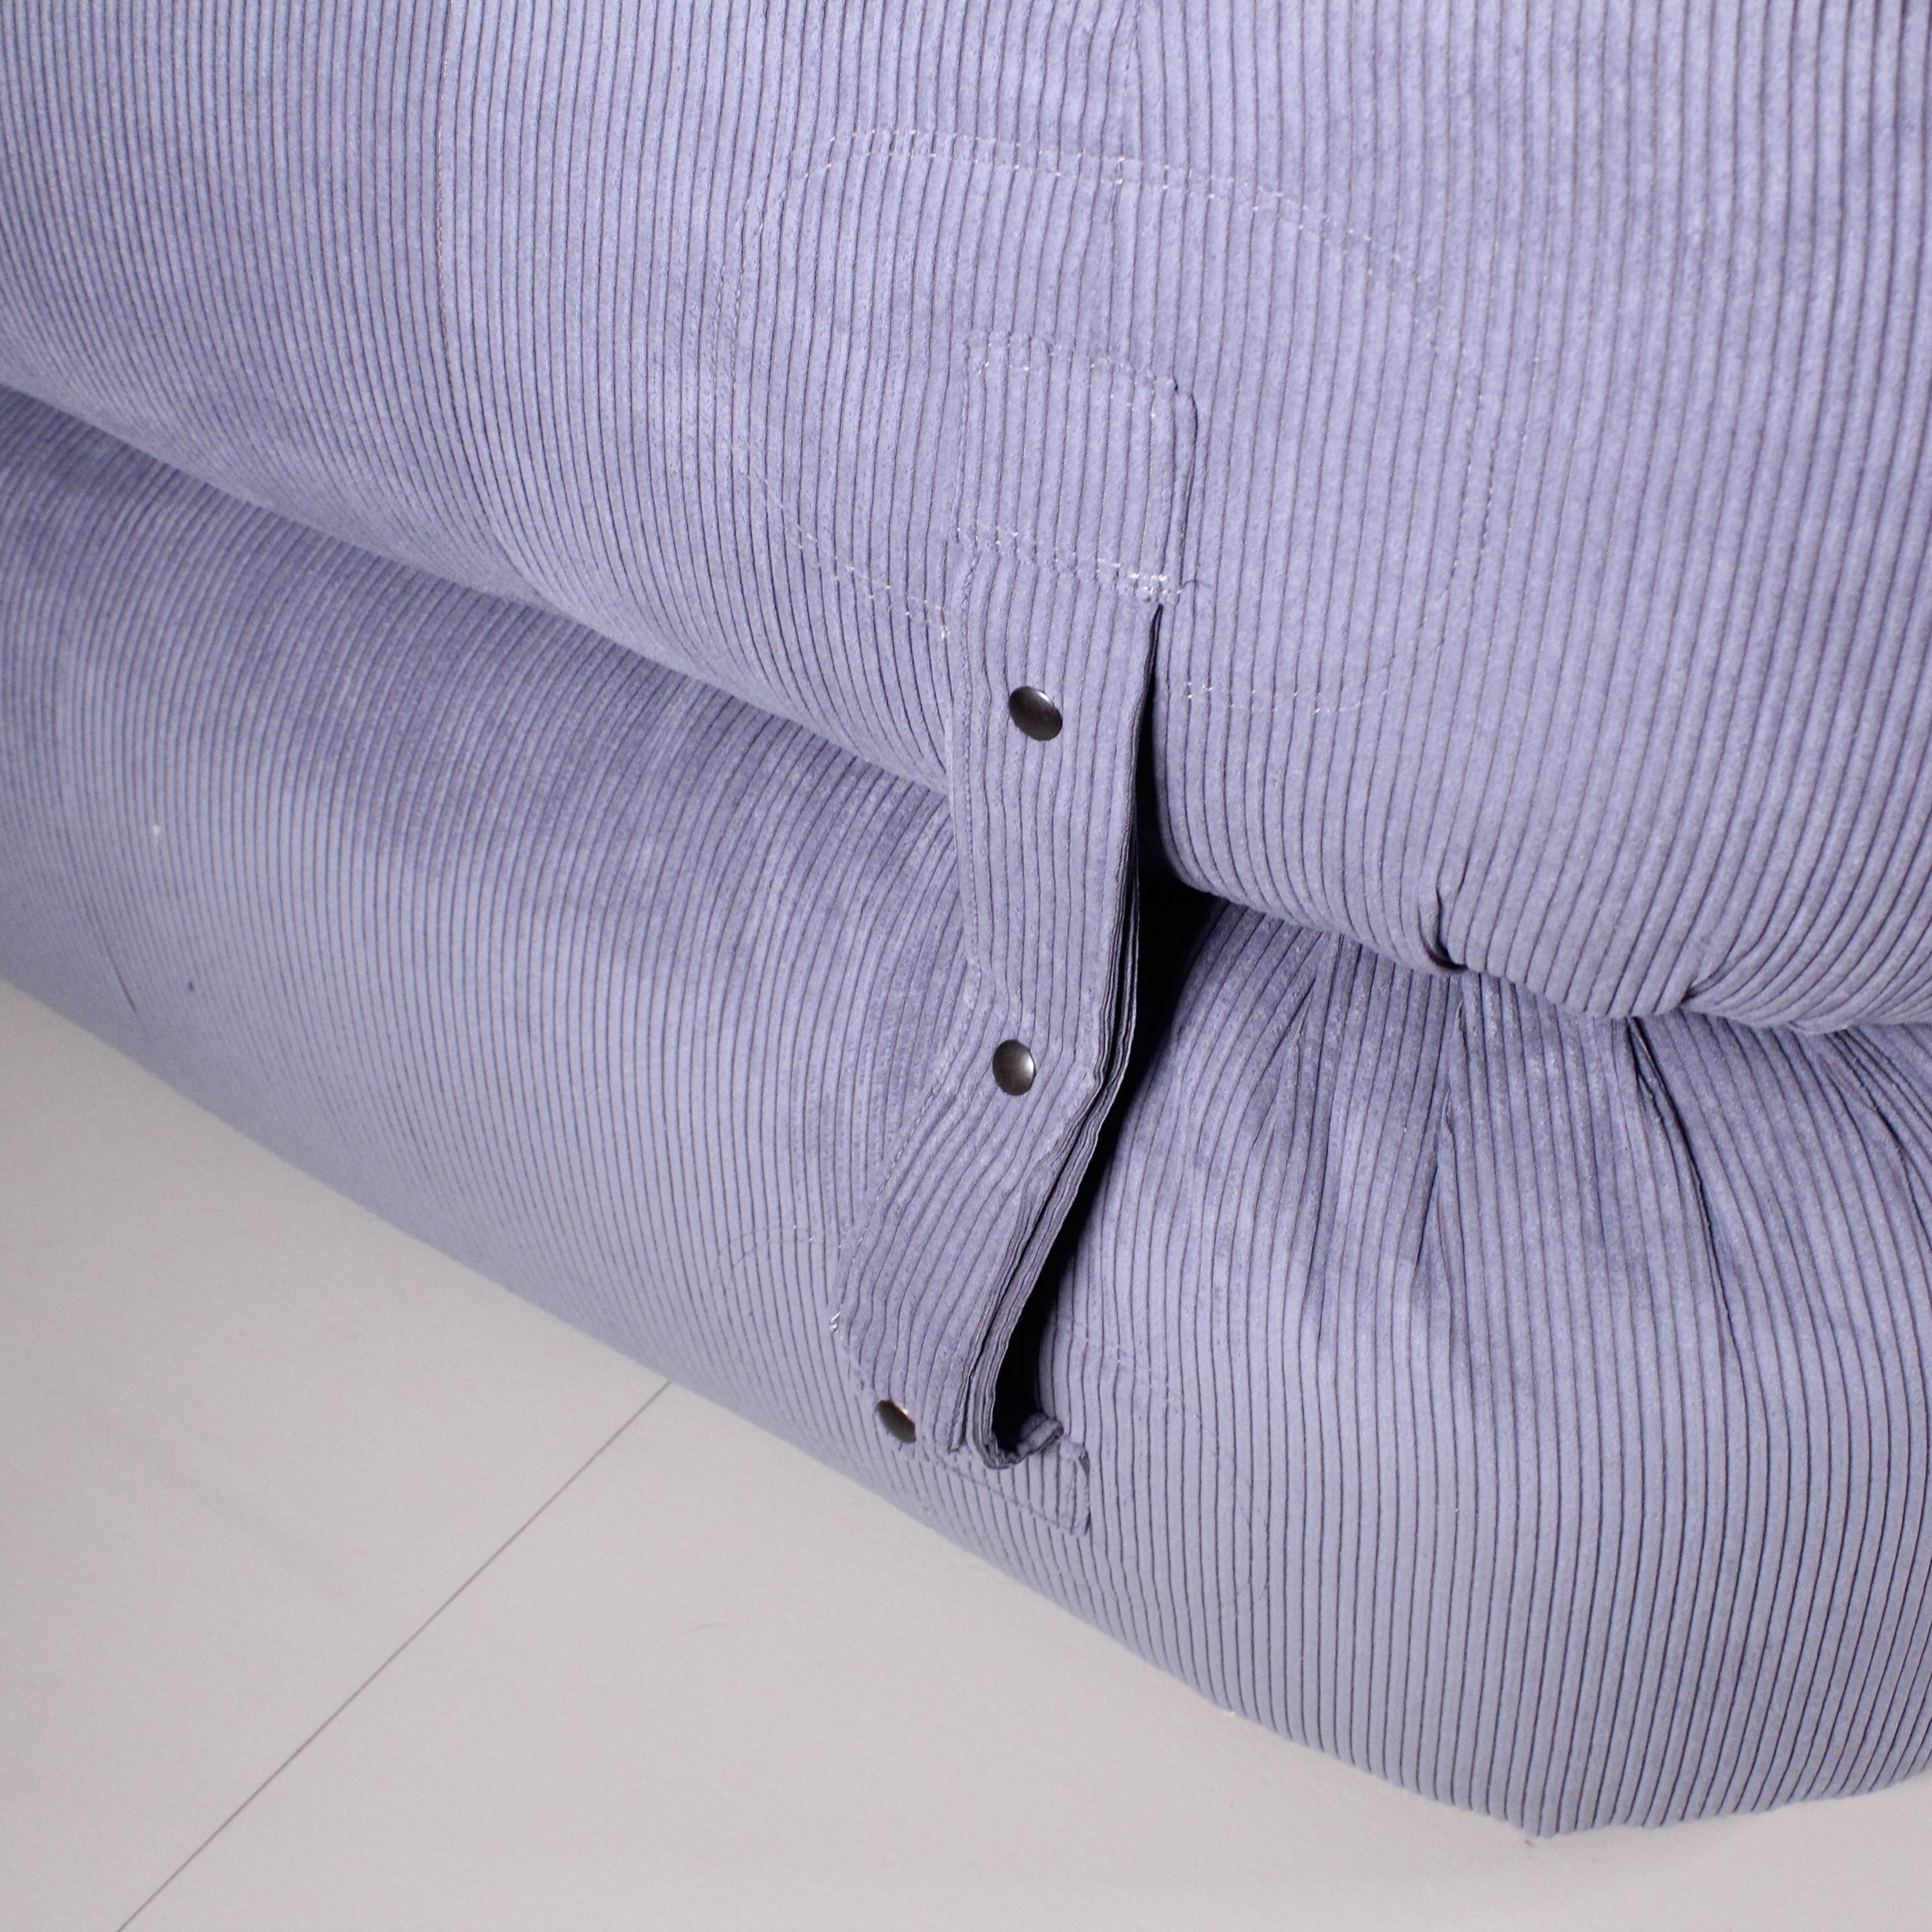 Anfibio sofa, Alessandro Becchi, Giovannetti, reupholstered For Sale 5